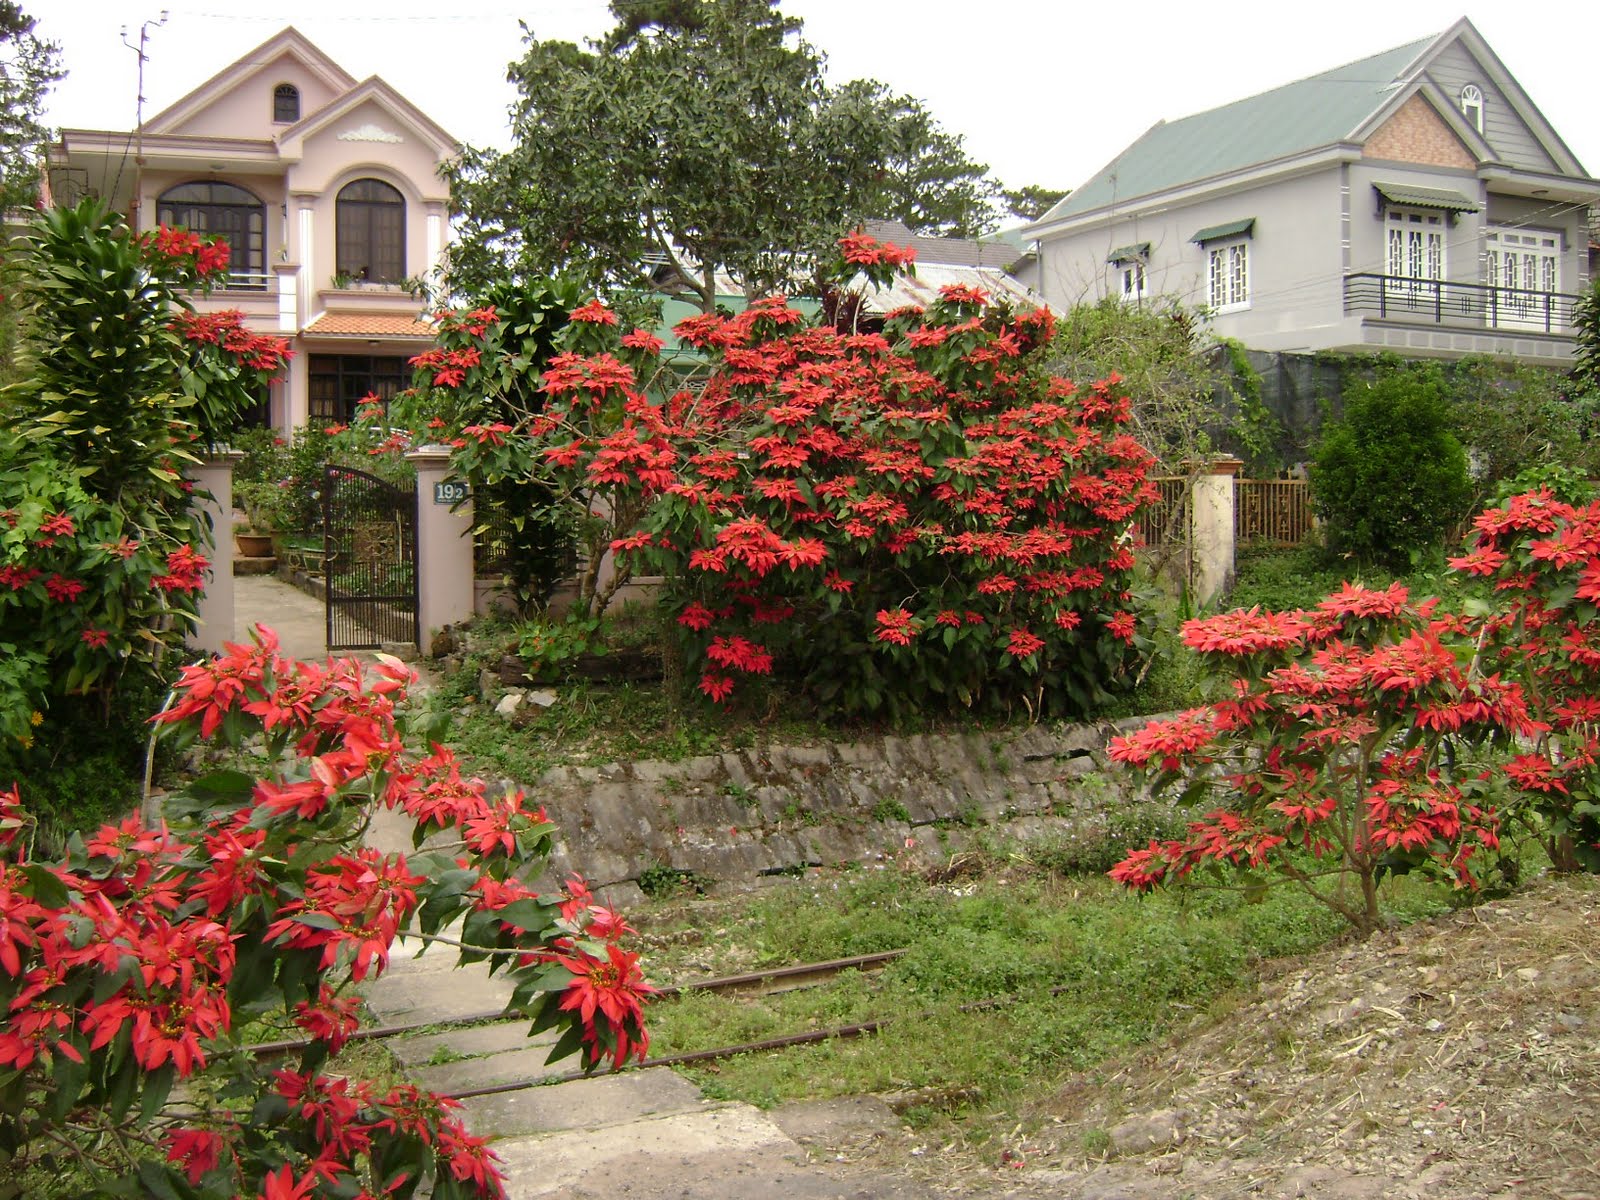 And here39;s my poinsettia tree, in Tuysonvien.